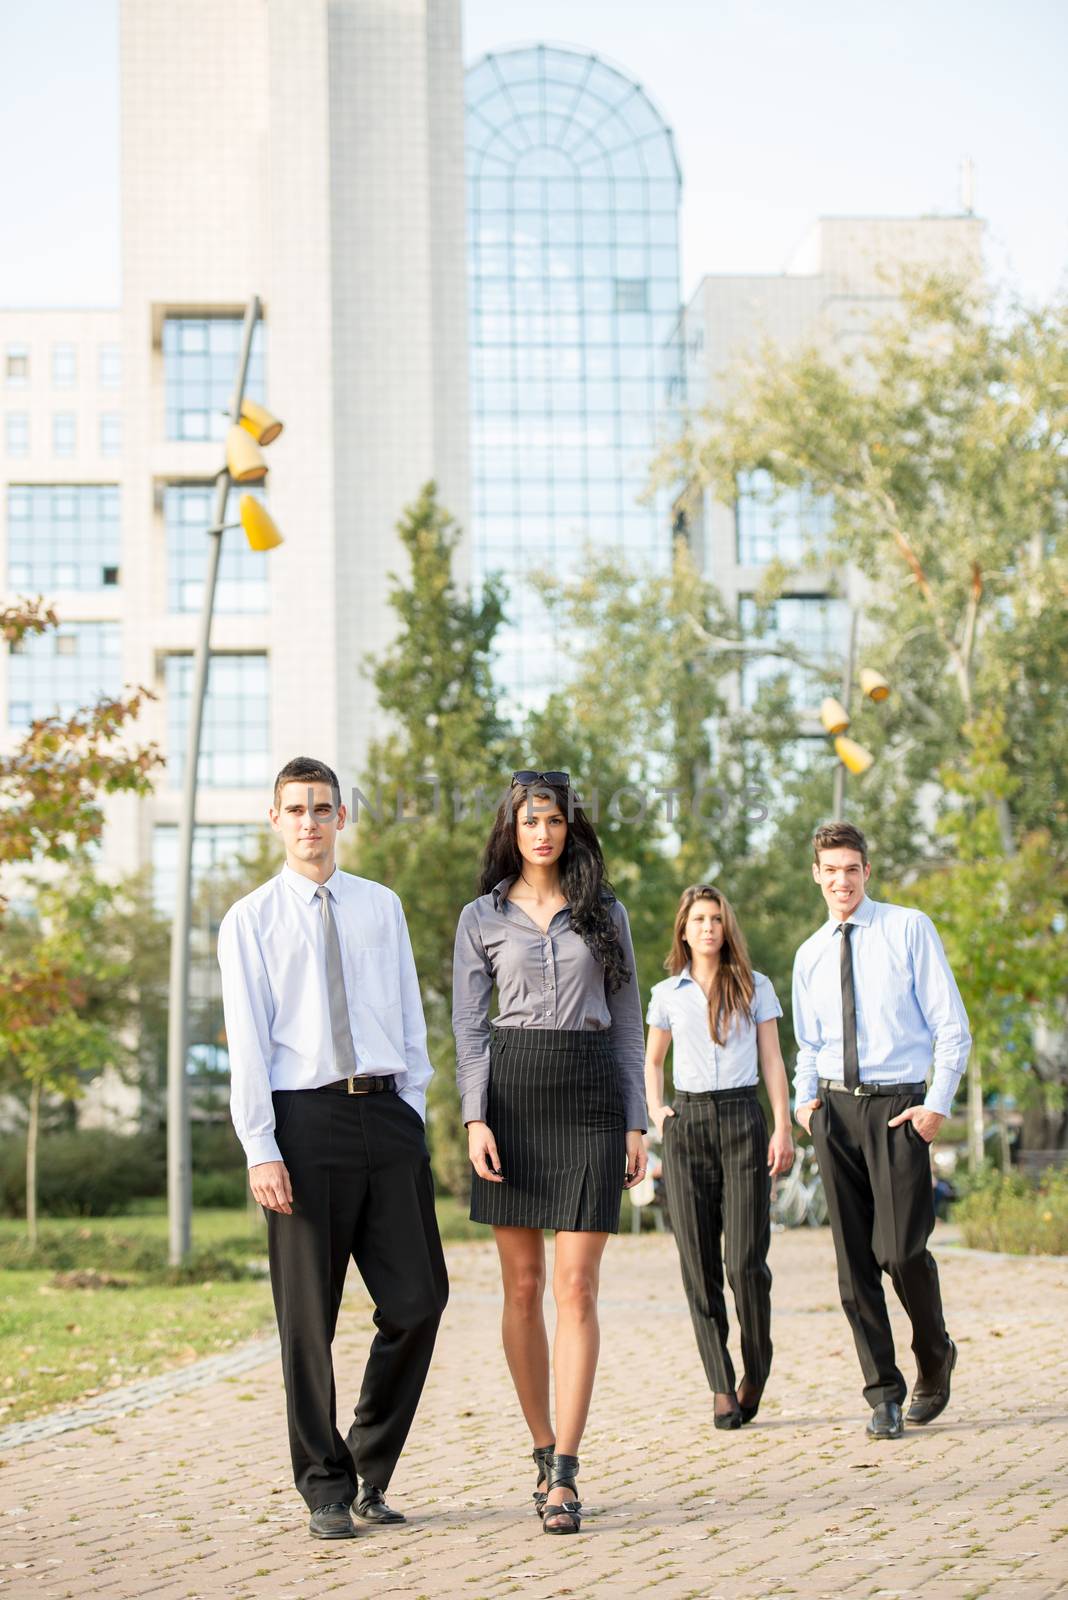 Group of young business people, formally dressed, walking through a park near their company.